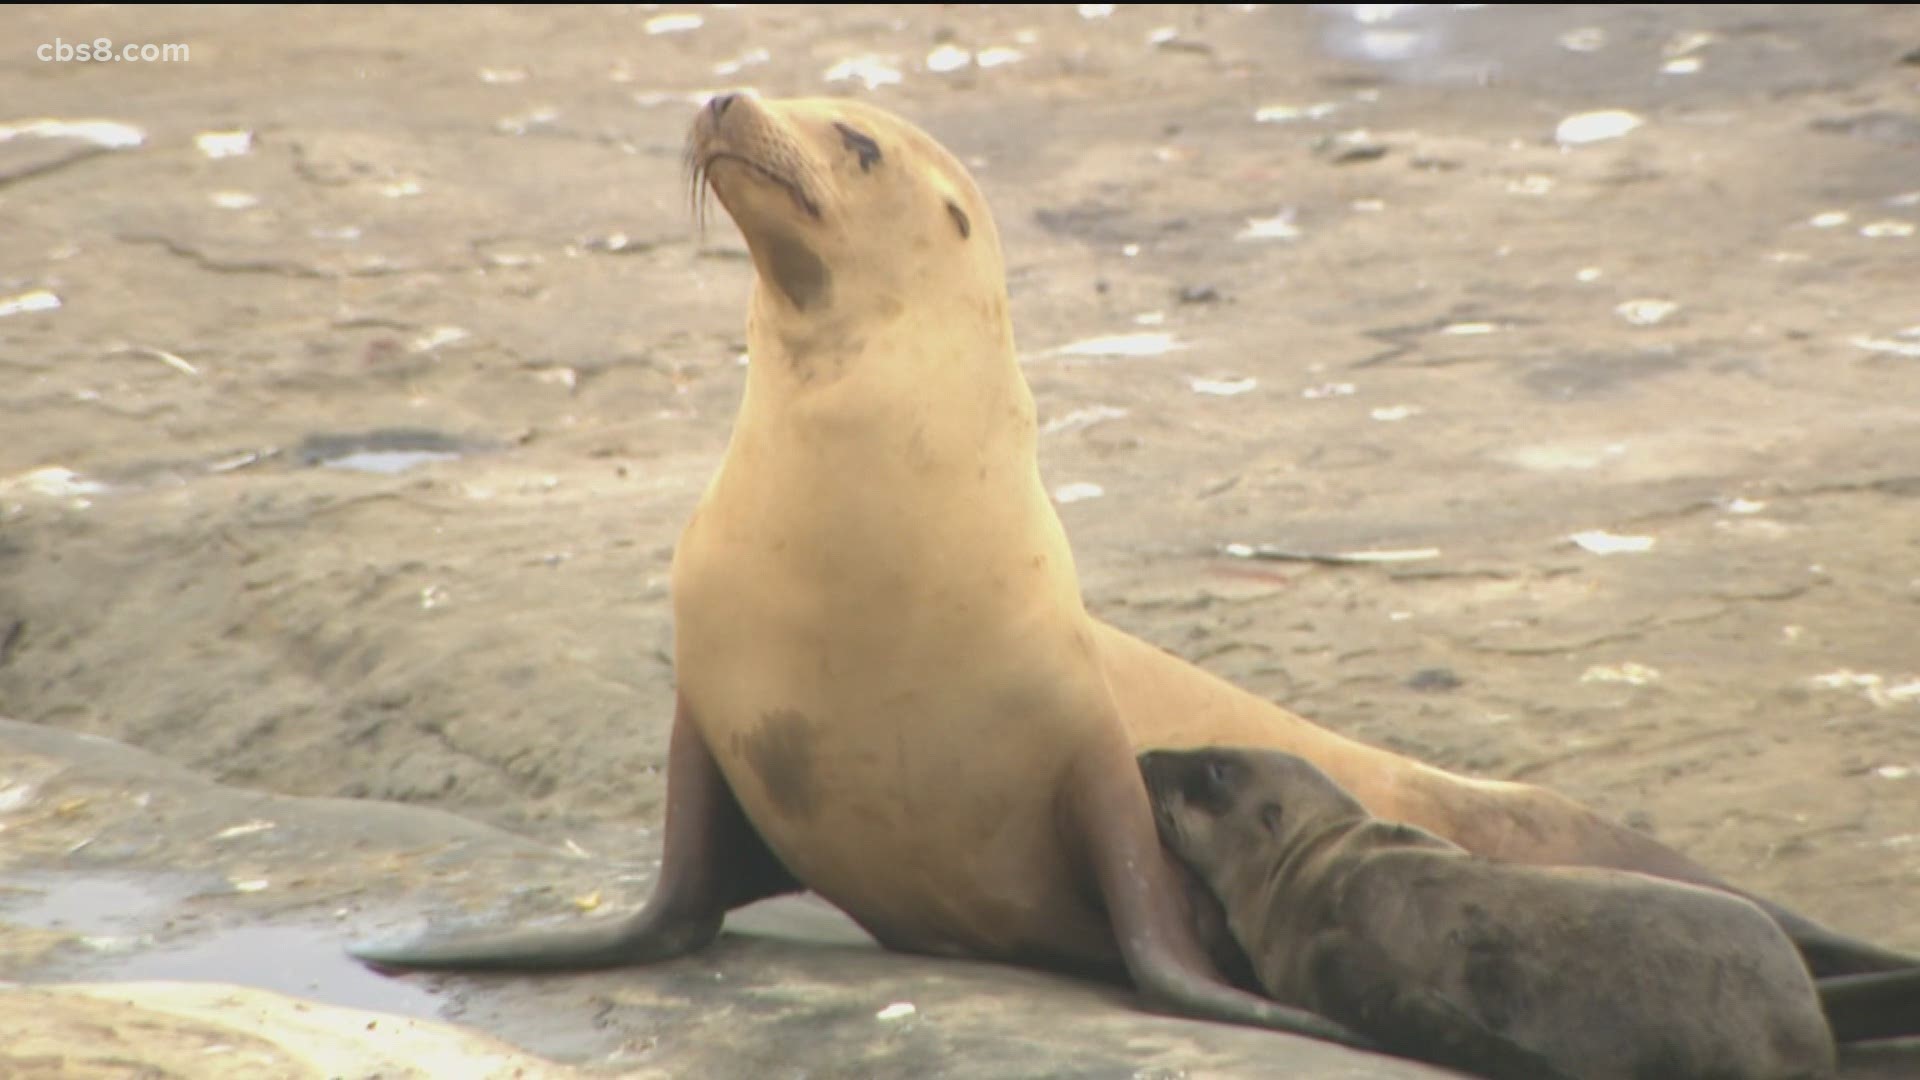 During sea lion pupping season, which runs until Oct. 31, sea lion mothers and pups will be vulnerable as the pups can't leave dry land for the first few months.